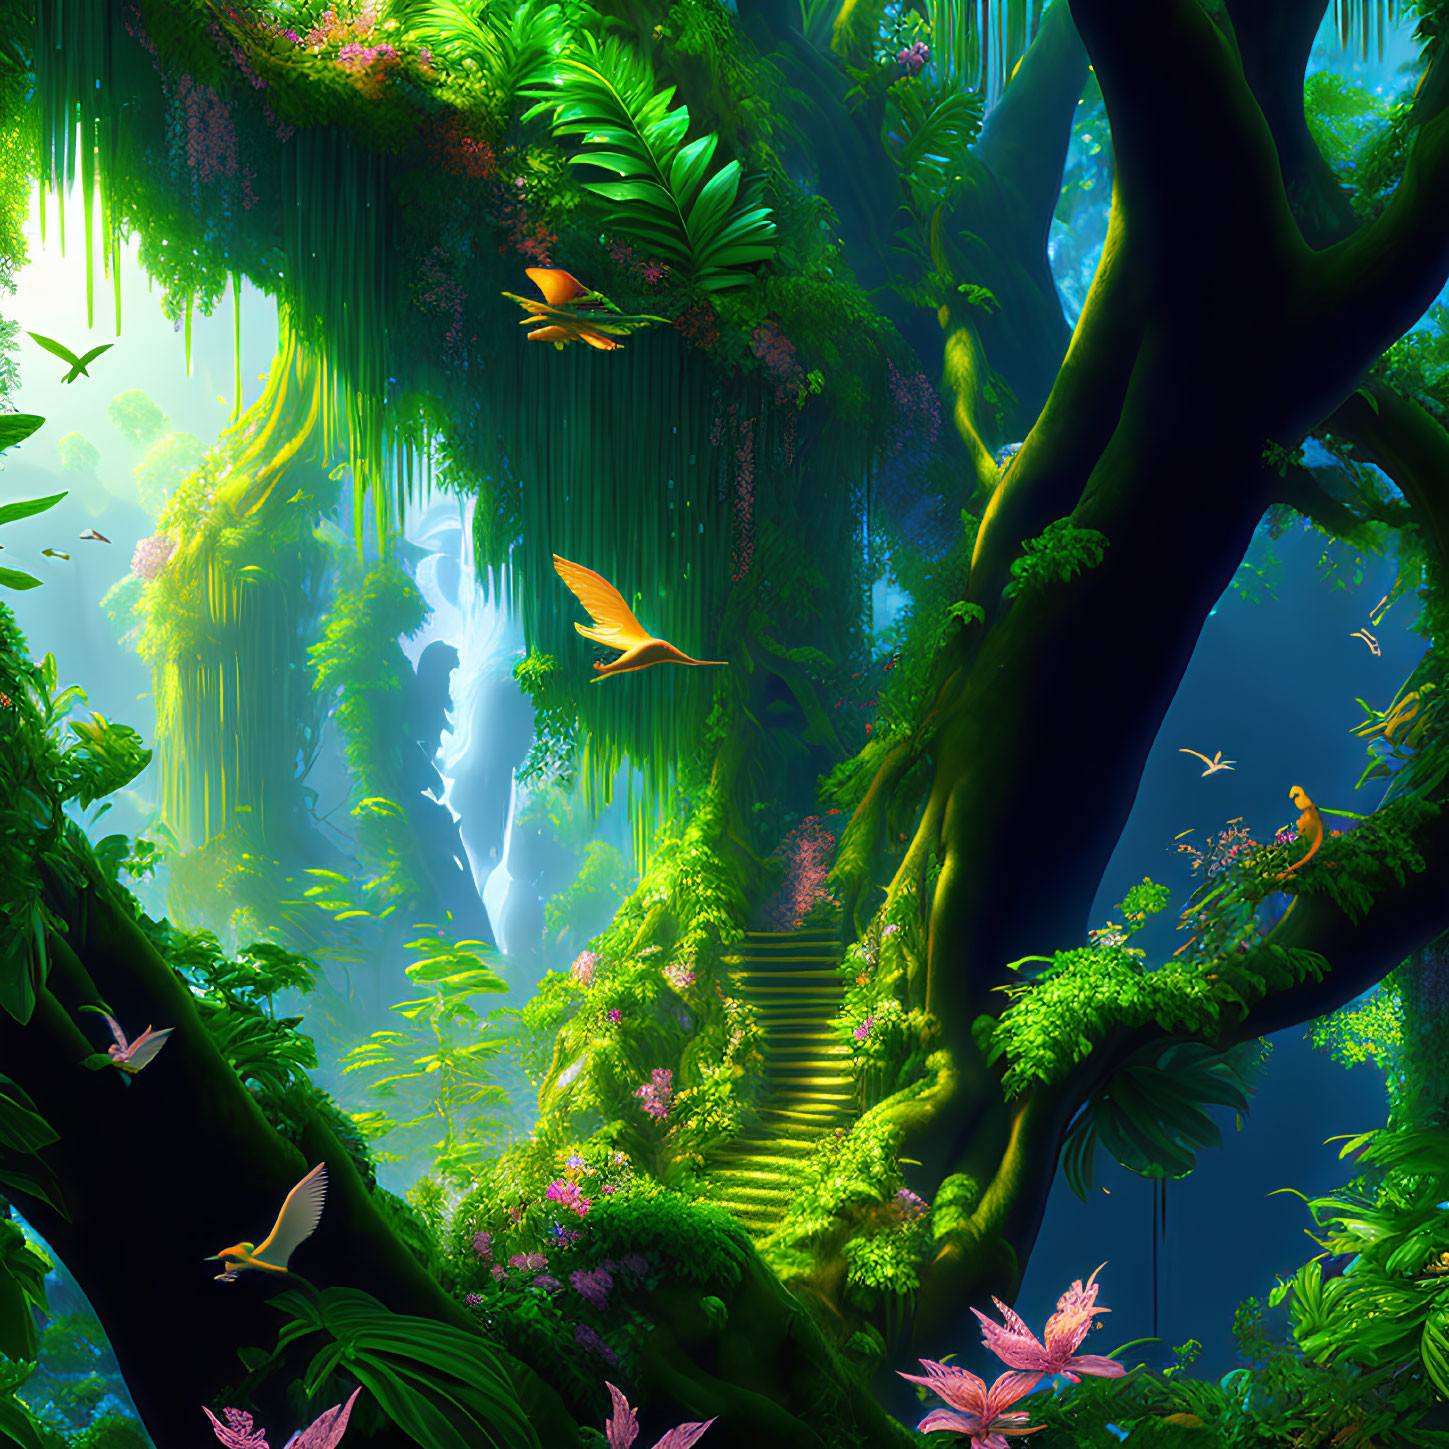 Enchanting forest scene with lush green foliage and birds in flight